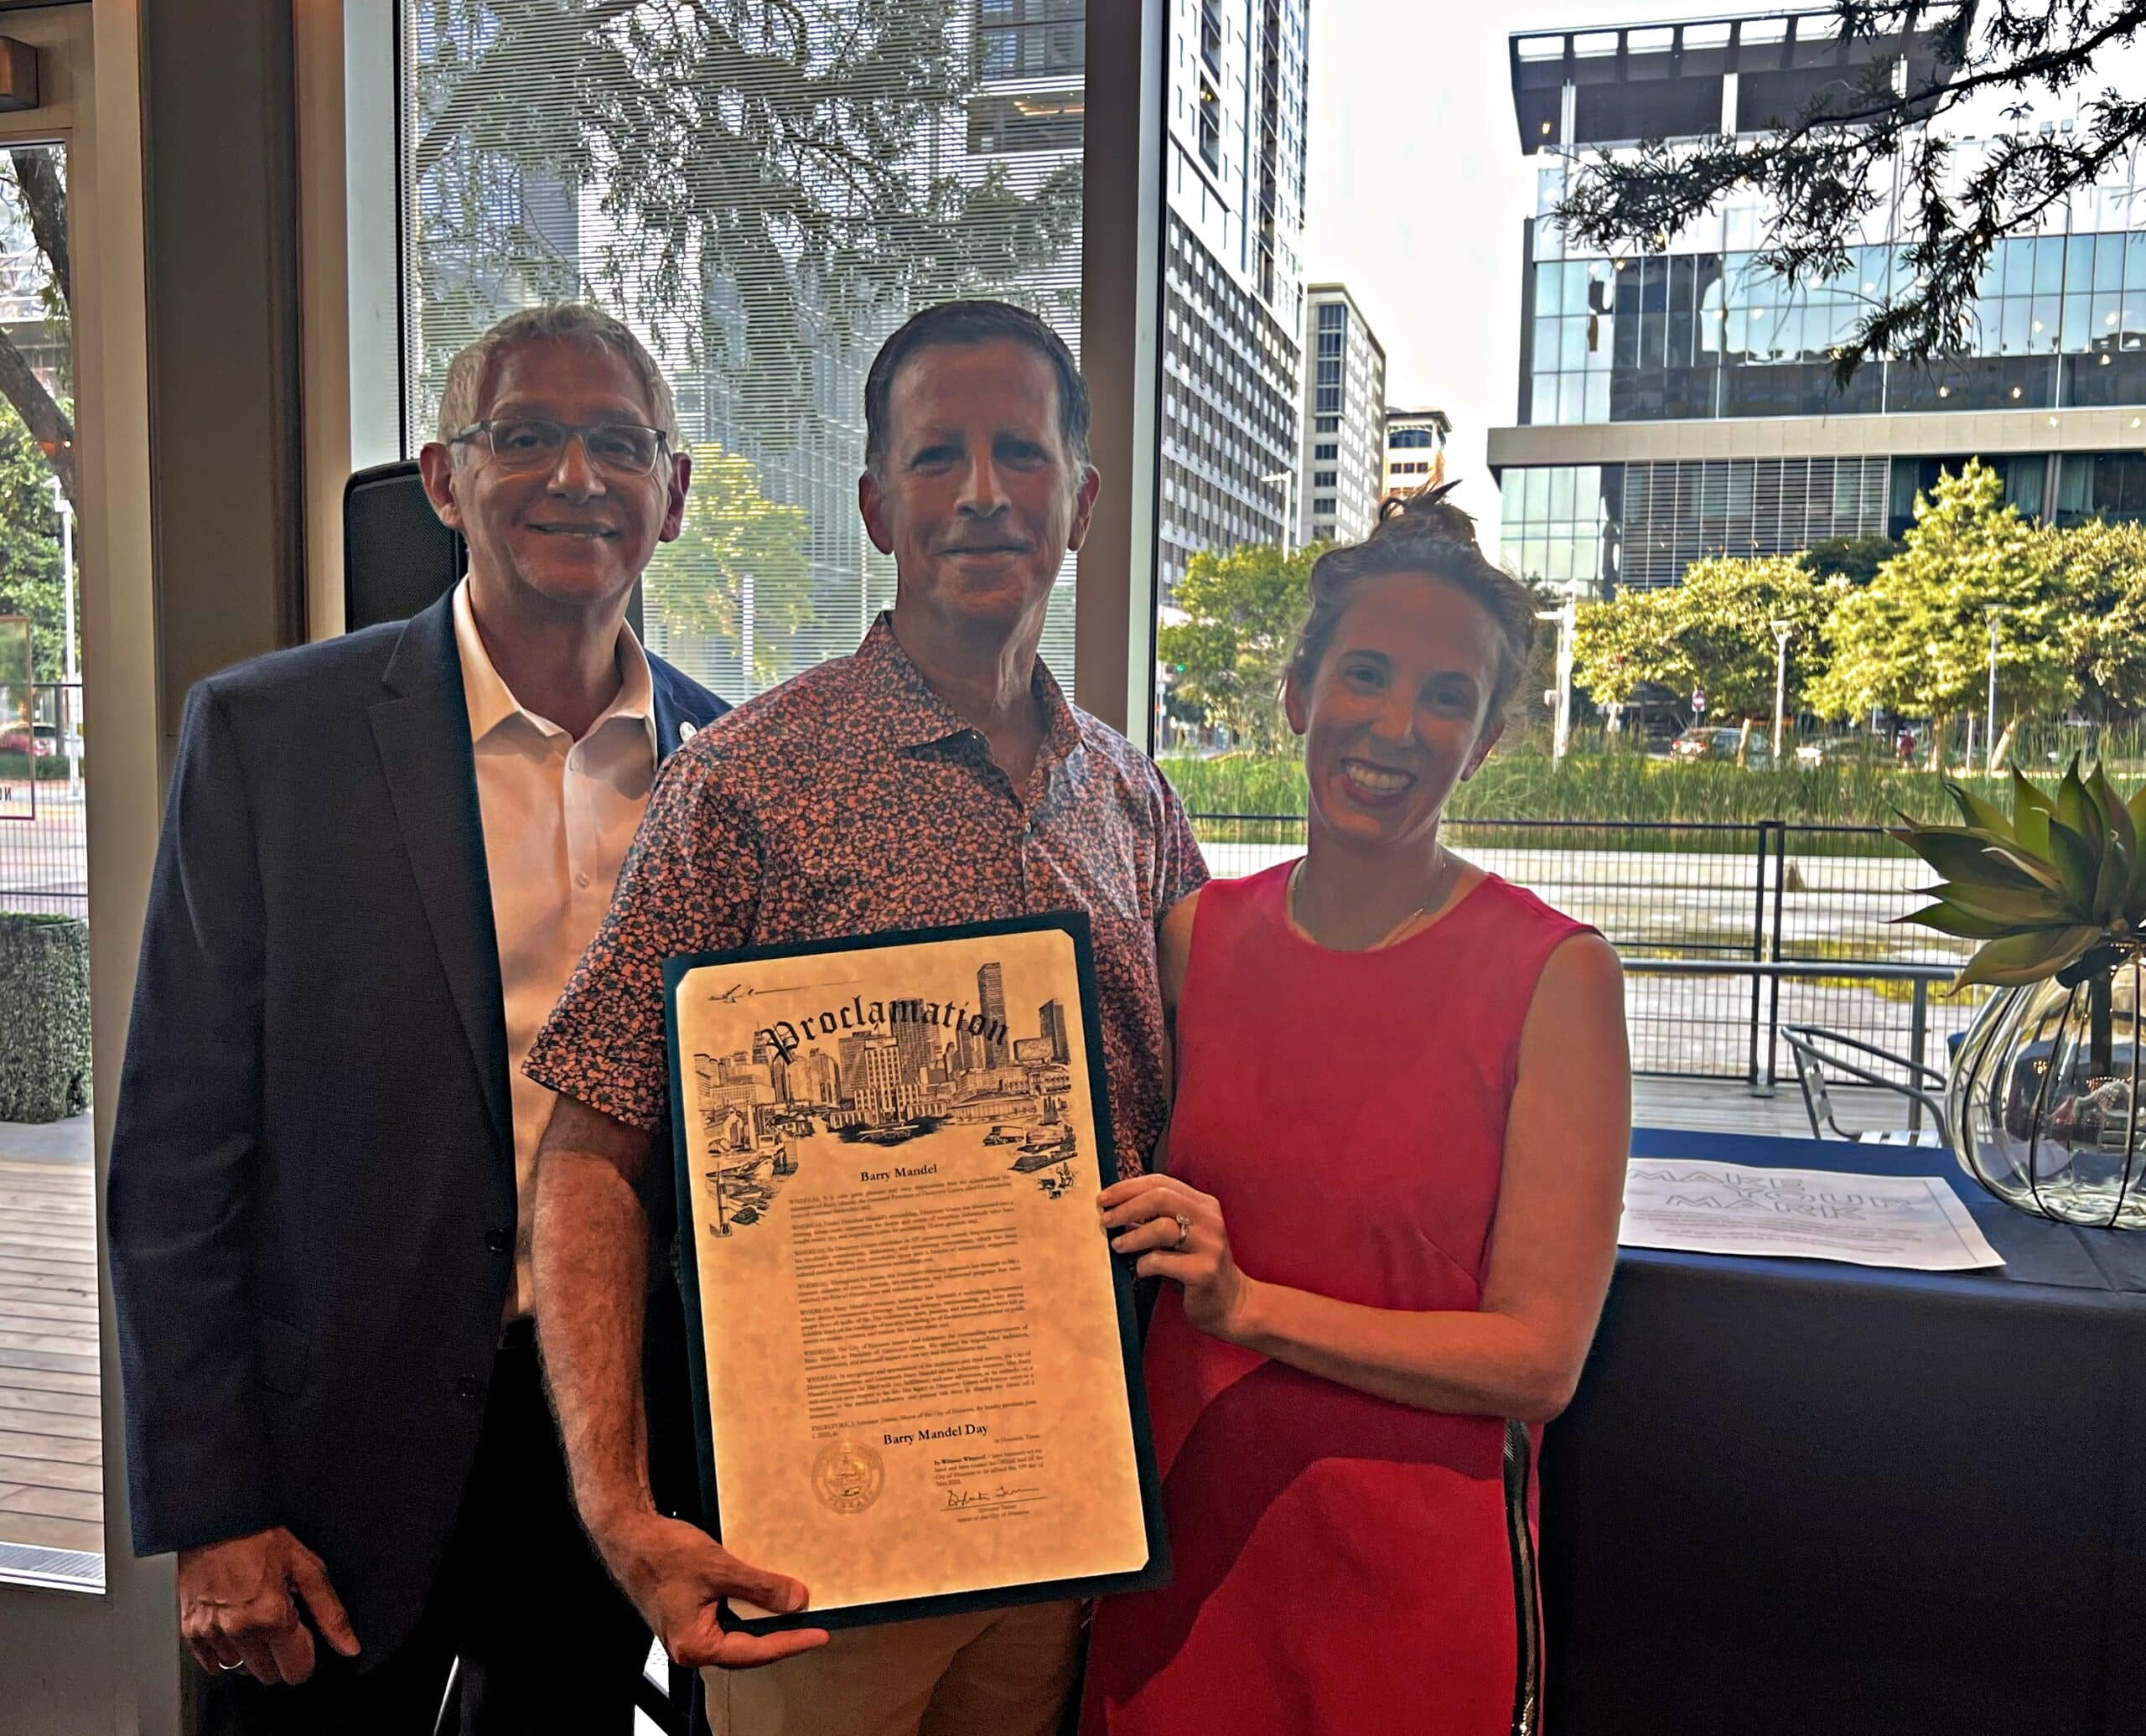 Robert Gallegos, Barry Mandel and Abbie Kamin pose for a photo with the Barry Mandel Day proclamation at Discovery Green in downtown Houston